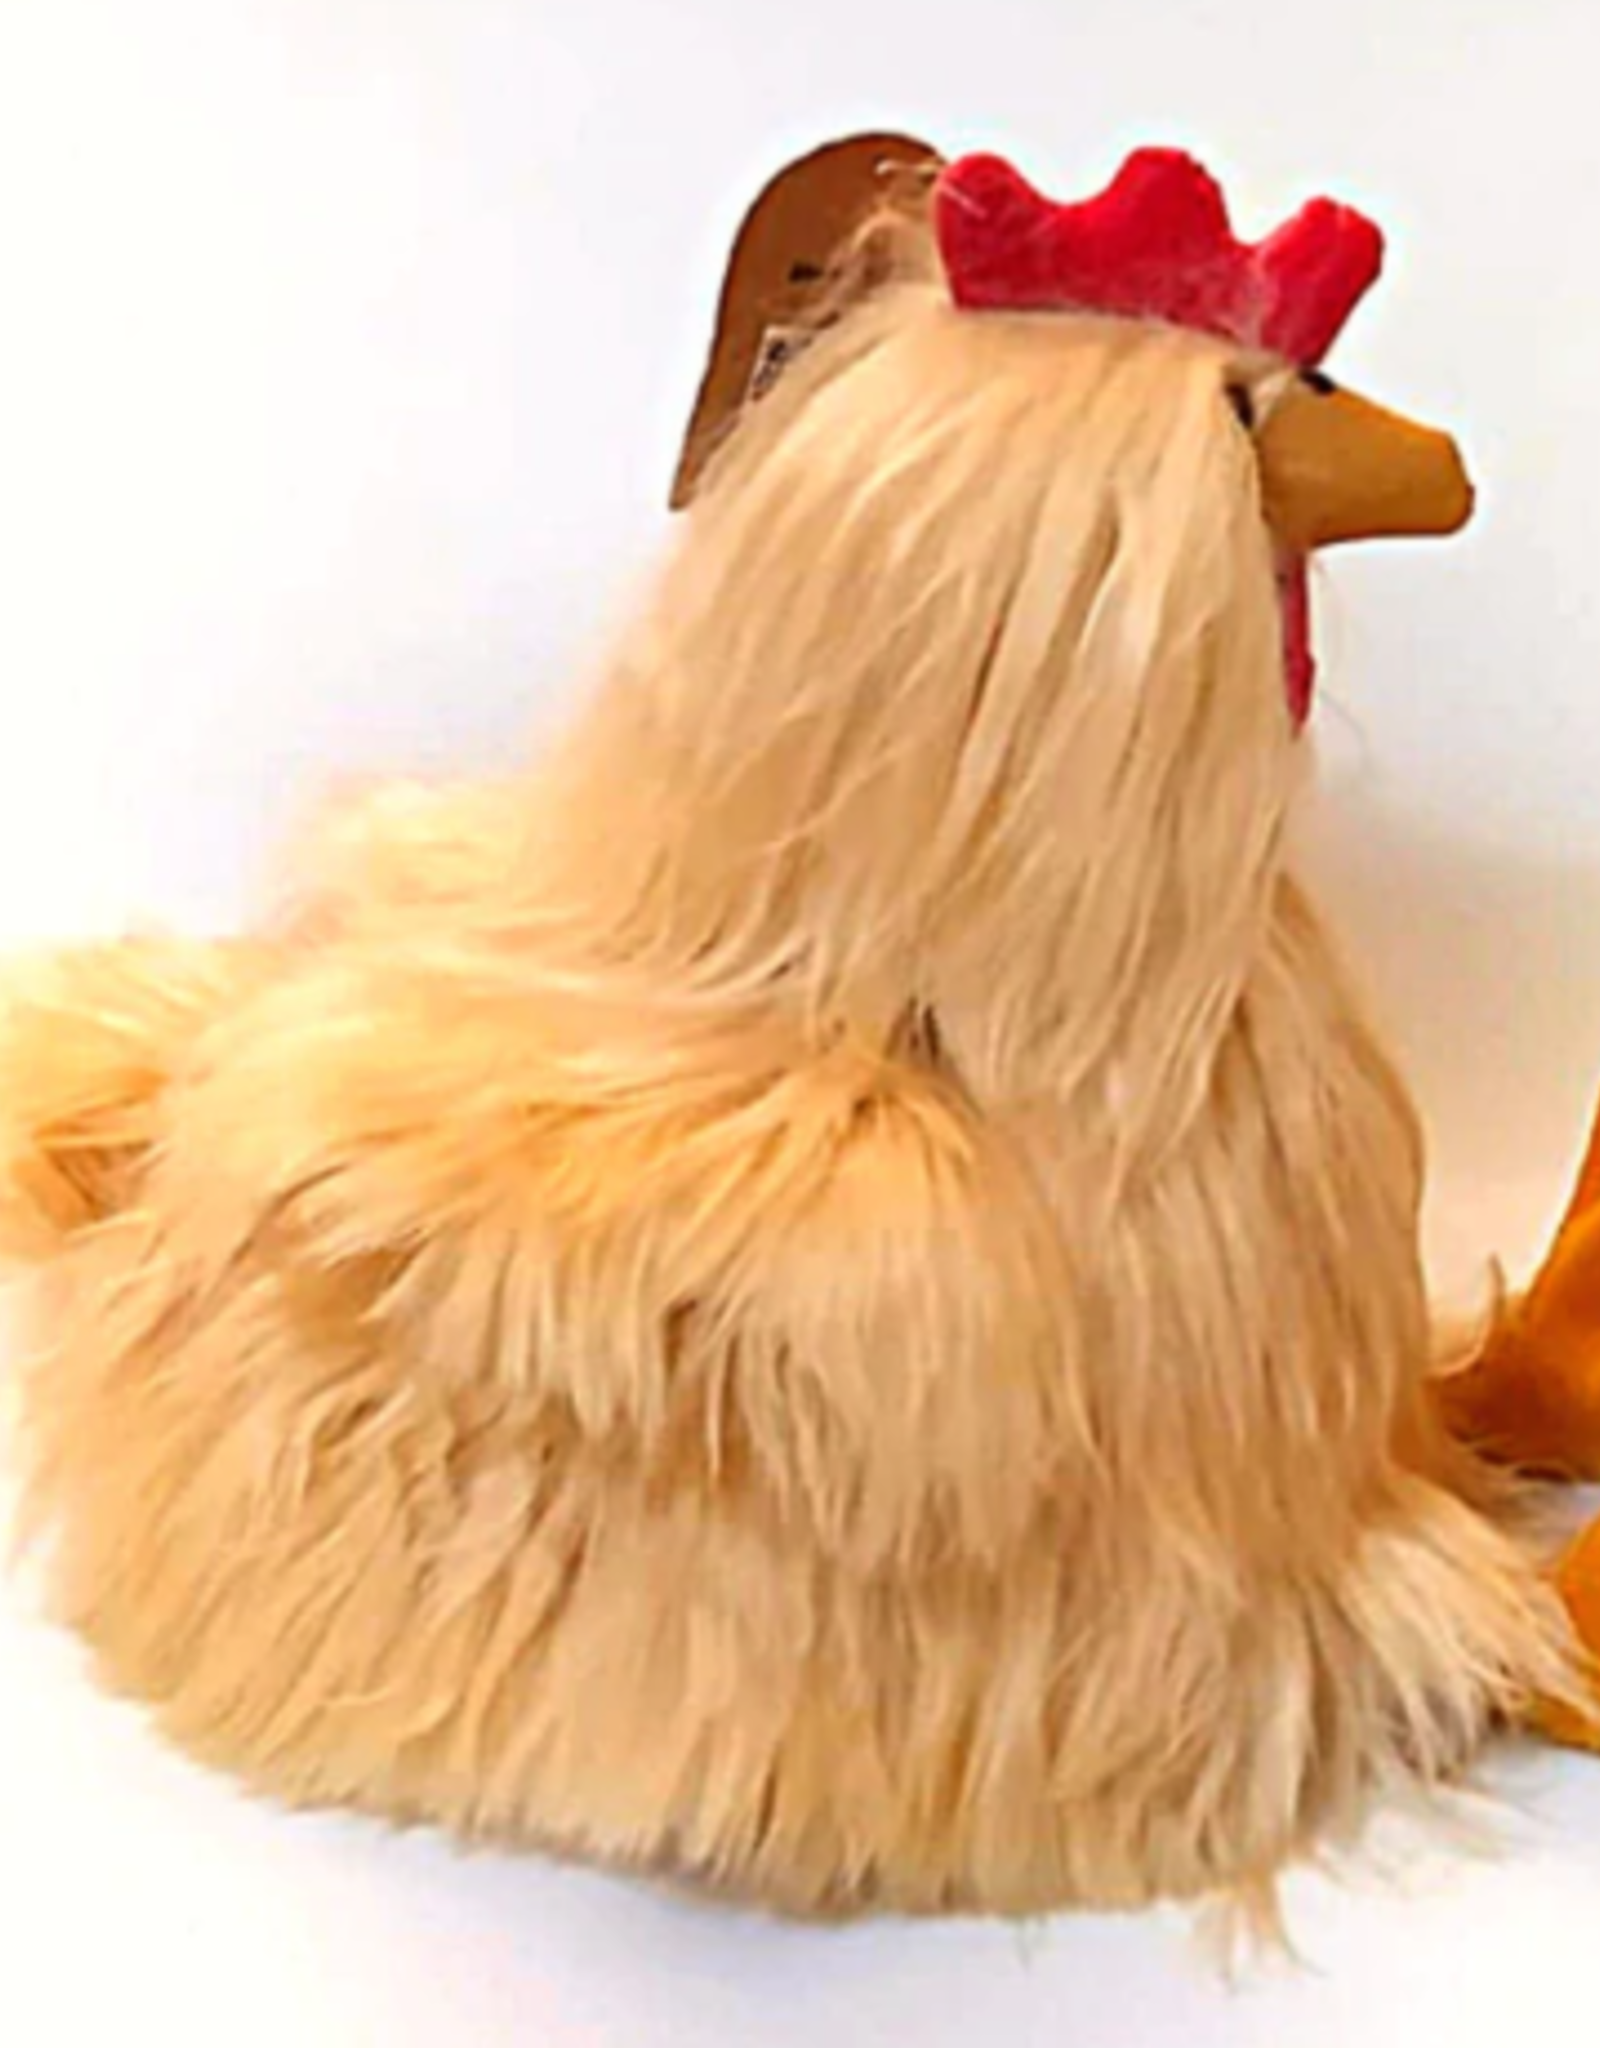 Blossom Inspirations Rooster Alpaca Fur Toy